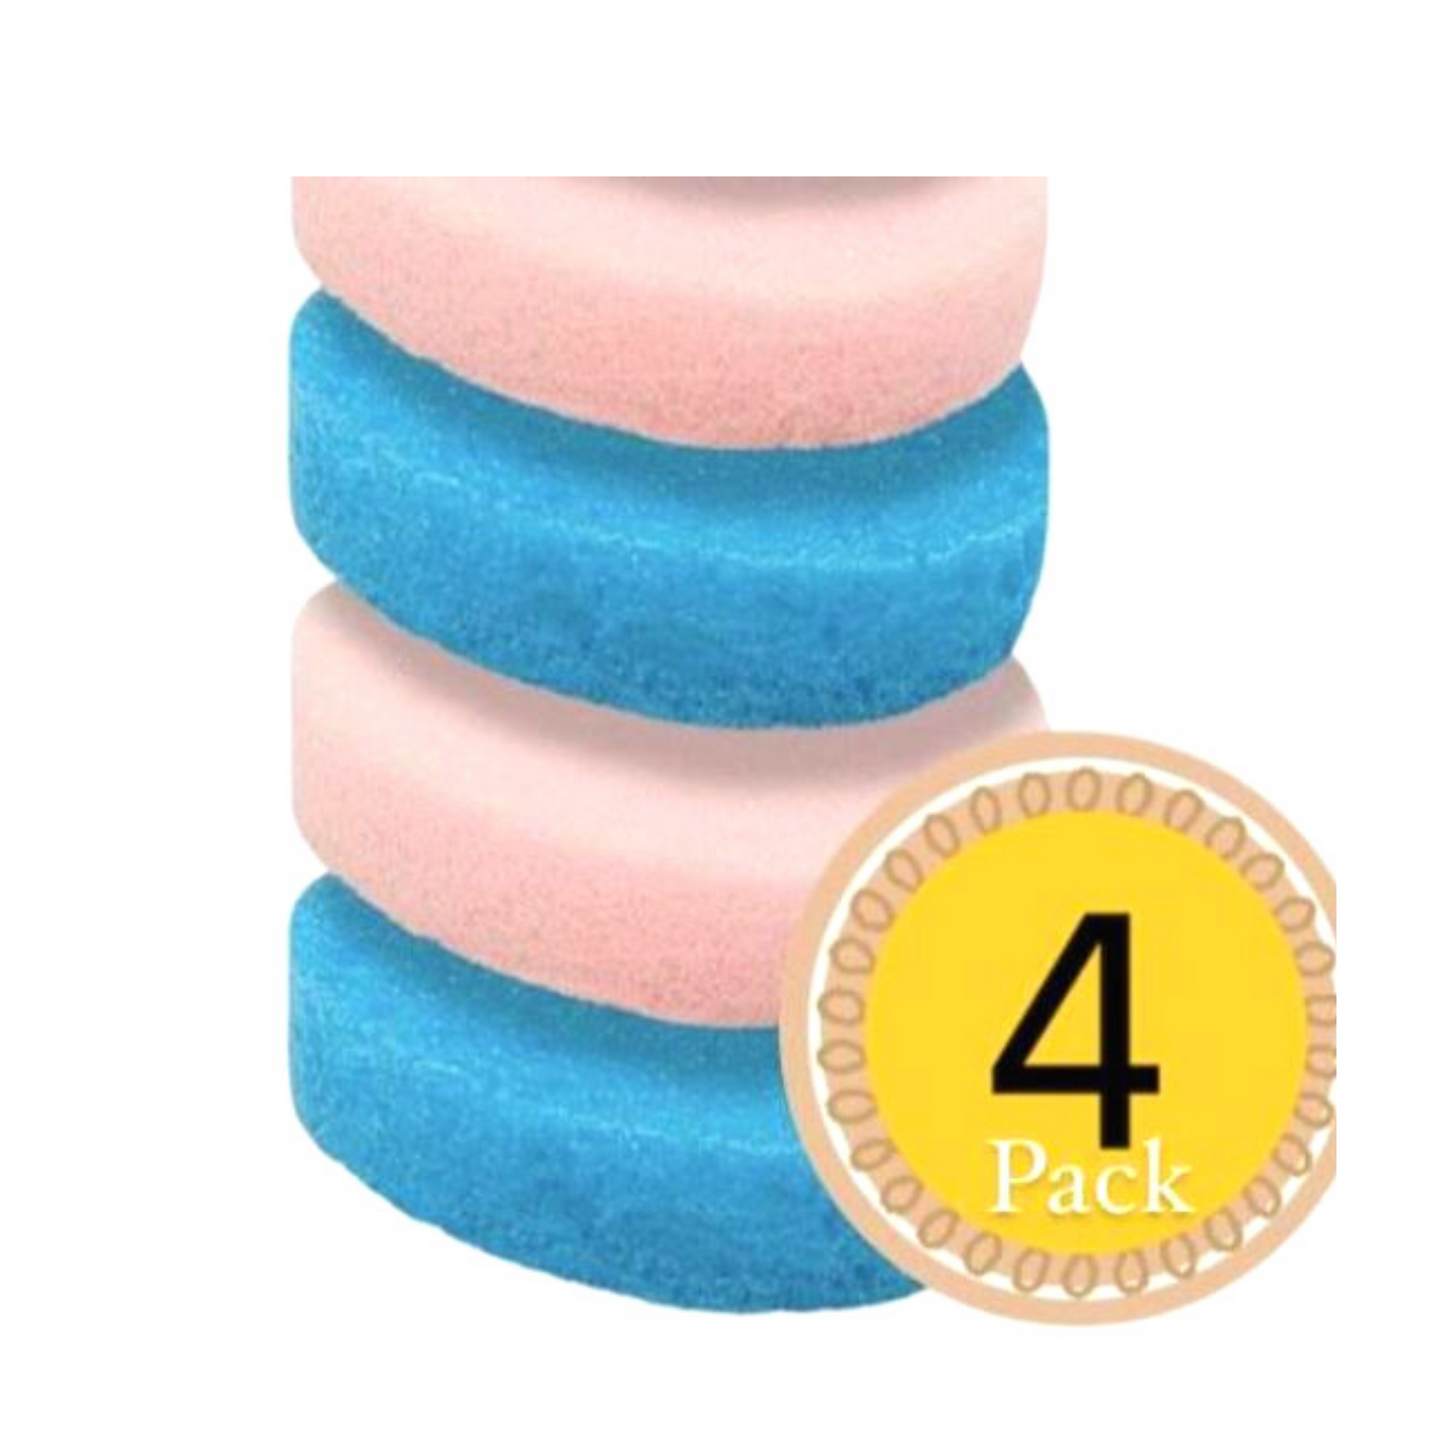 Replacement Sponges - 4 Pack